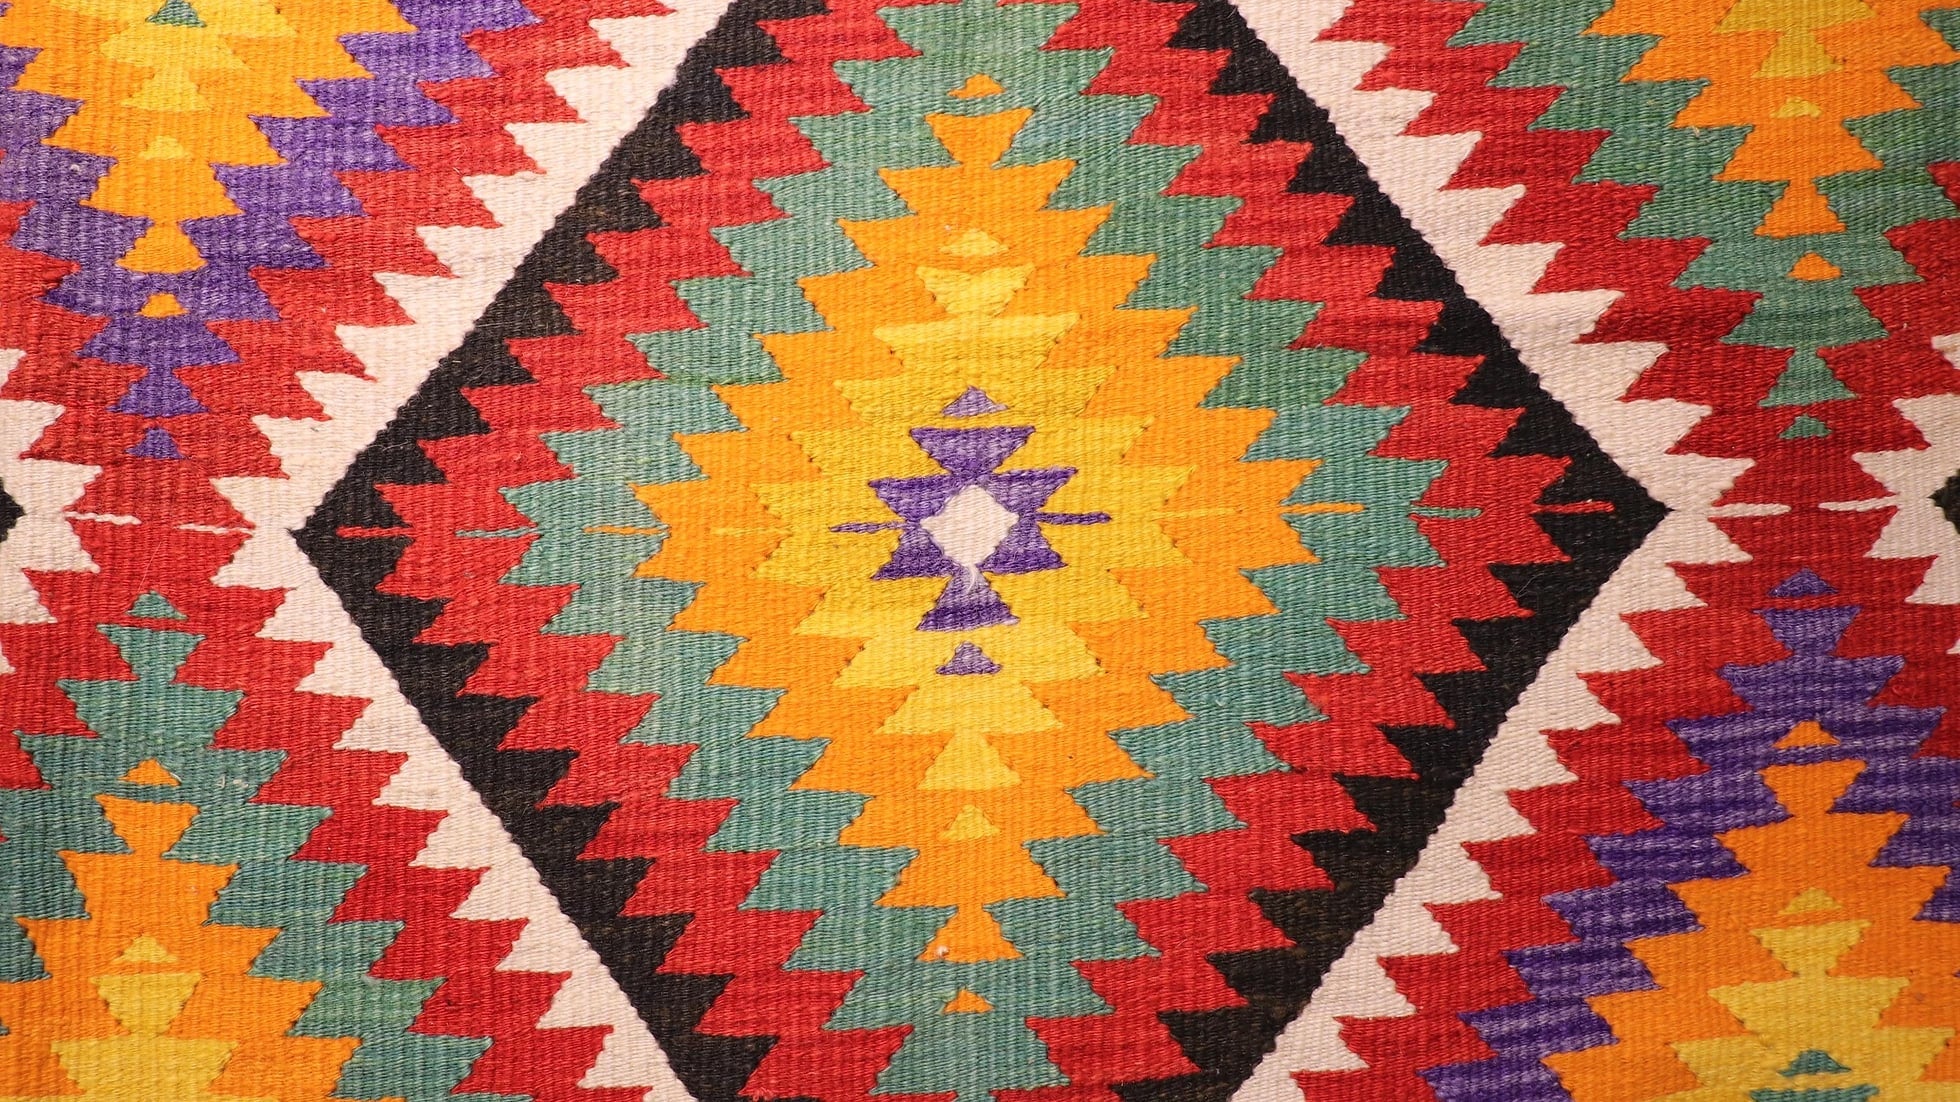 details of vintage turkish hand-knotted contemporary flat-weave rug in colorful diamond patterns